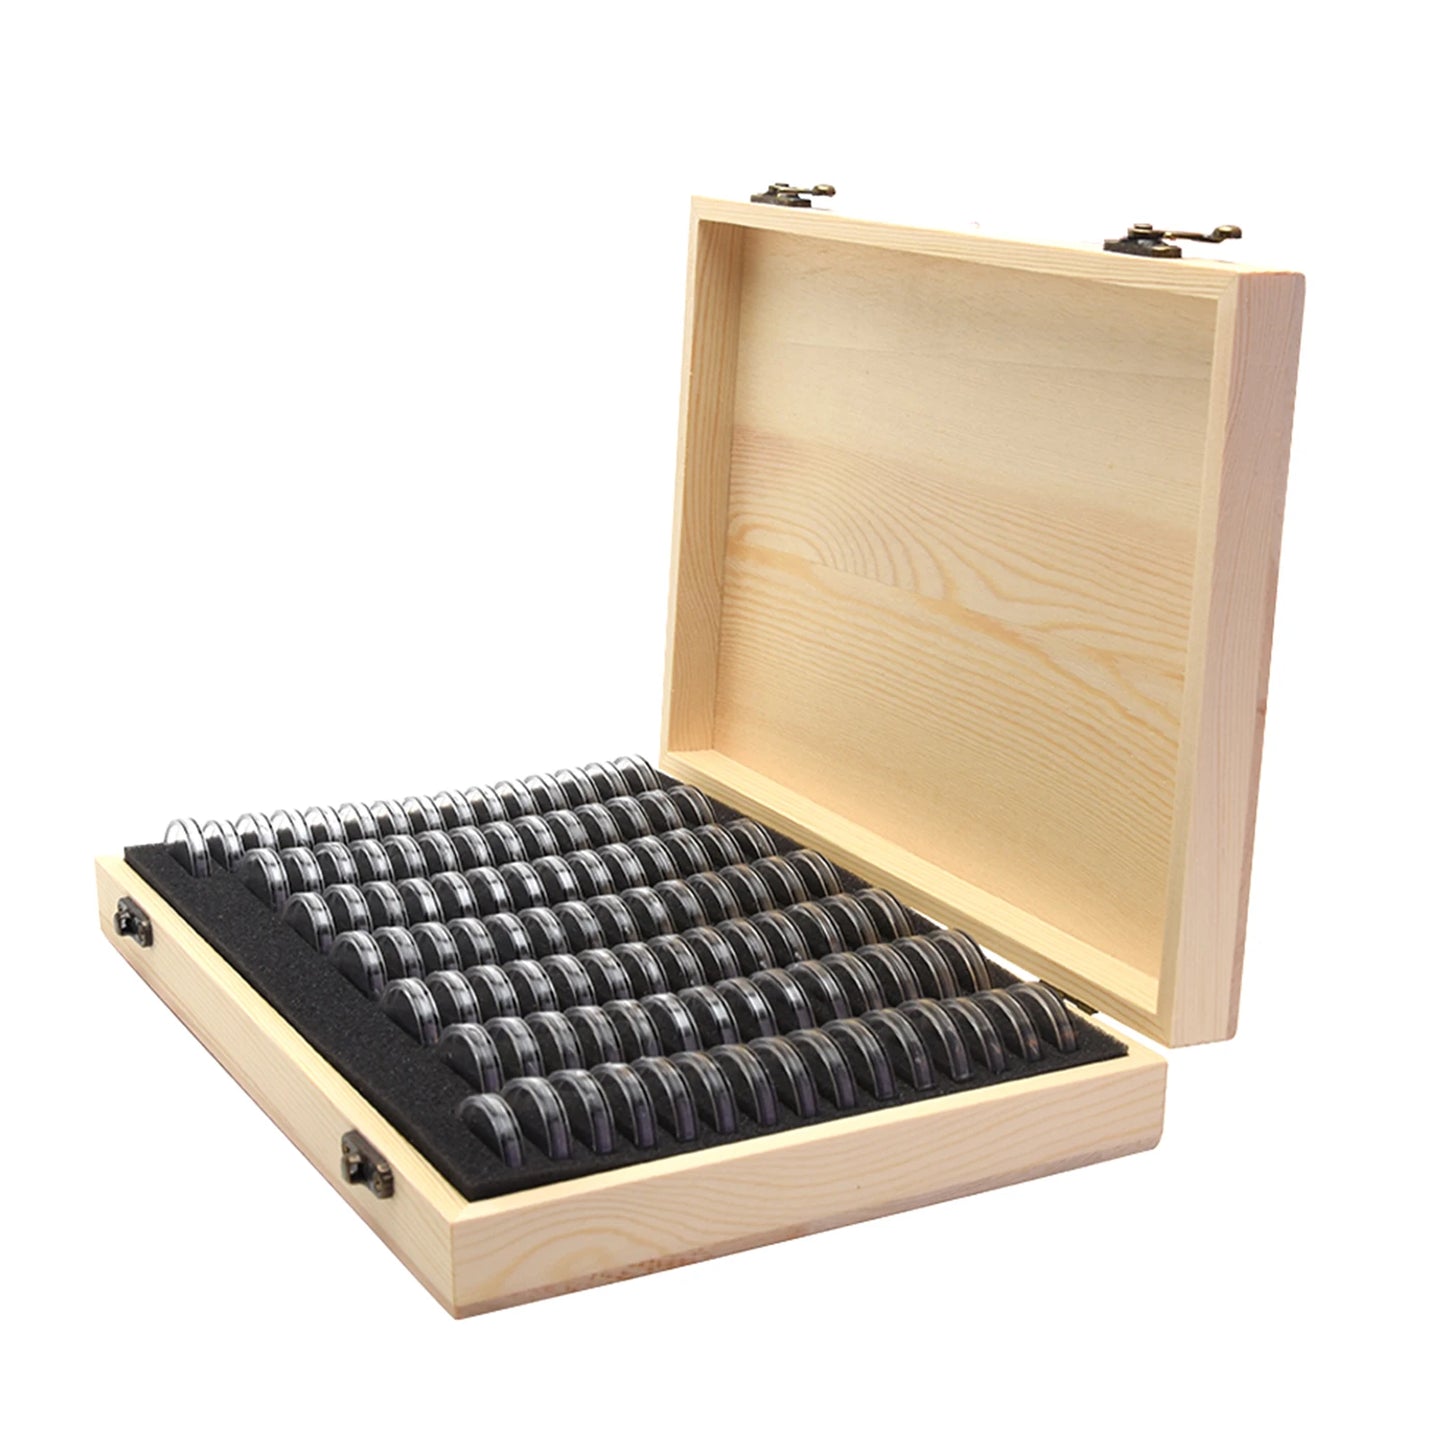 Unique Wooden Coin Display Case - Adjustable and Stylish for Collectors"